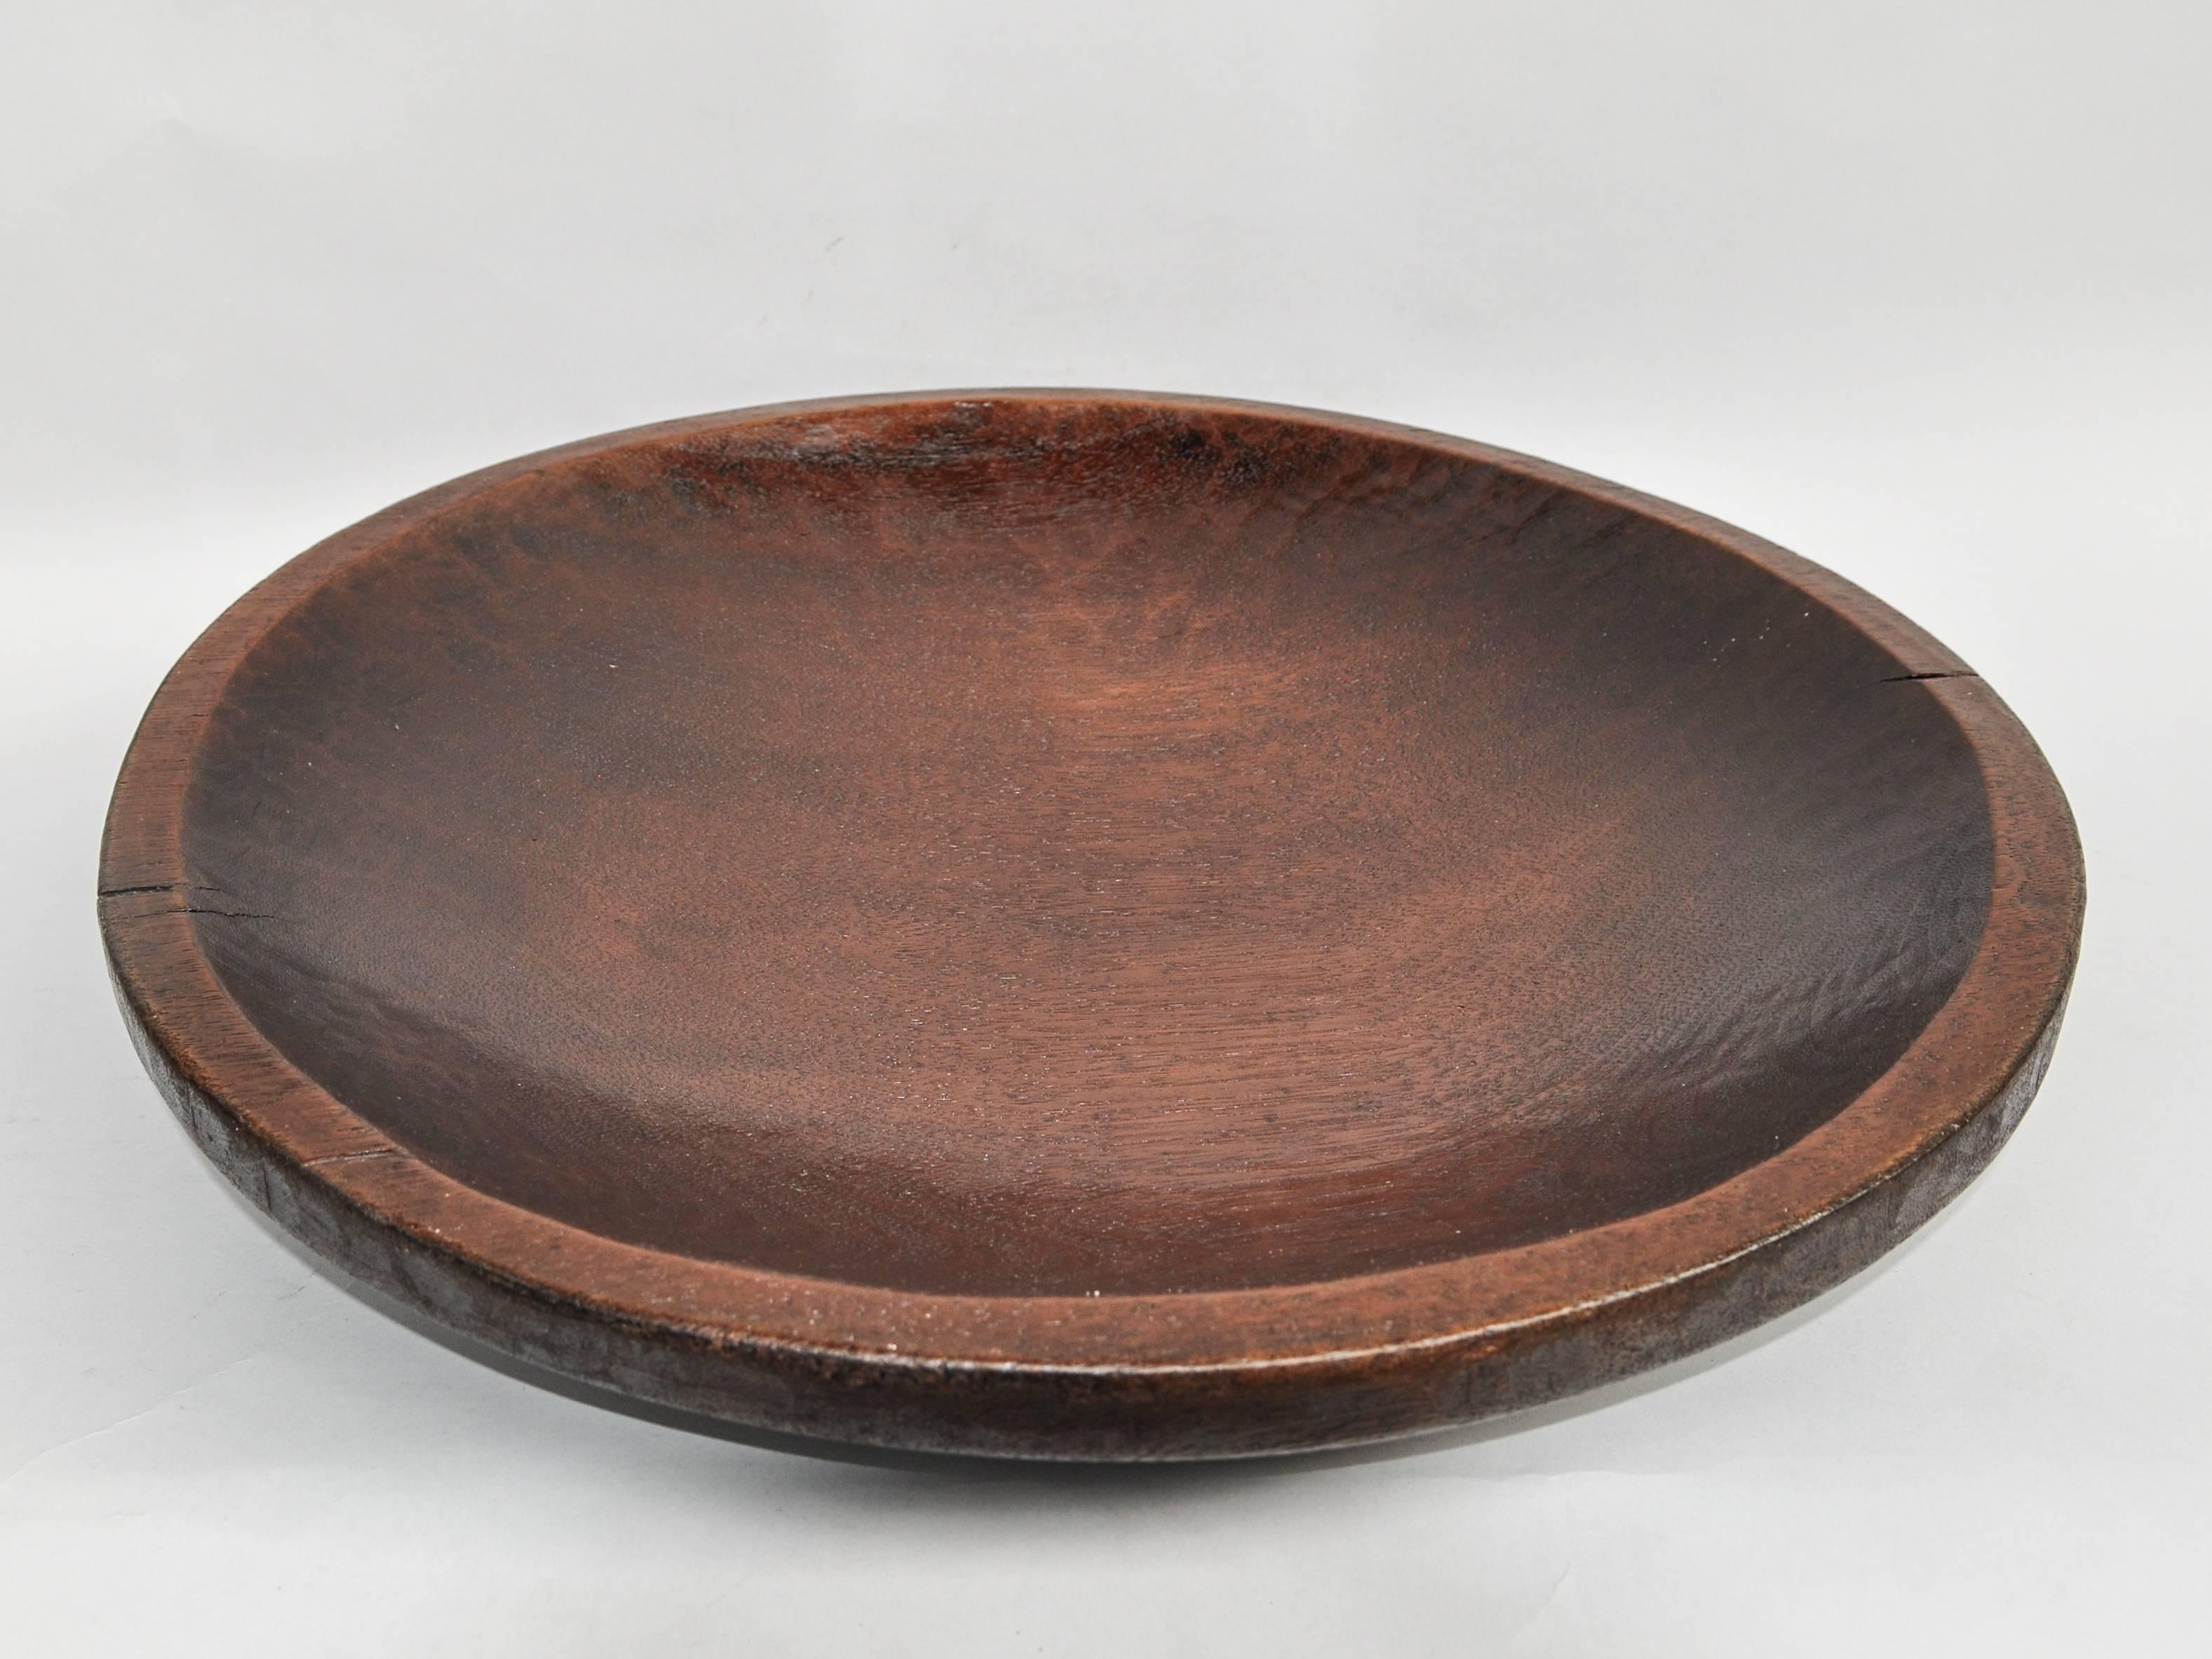 Large decorative wood bowl from Lampung, Sumatra. Merbau Wood. mid-20th century.
Offered by Bruce Hughes.
Large shallow wooden bowl from Lampung, Sumatra, mid-20th century. This large wooden bowl was fashioned by hand from a single piece of merbau